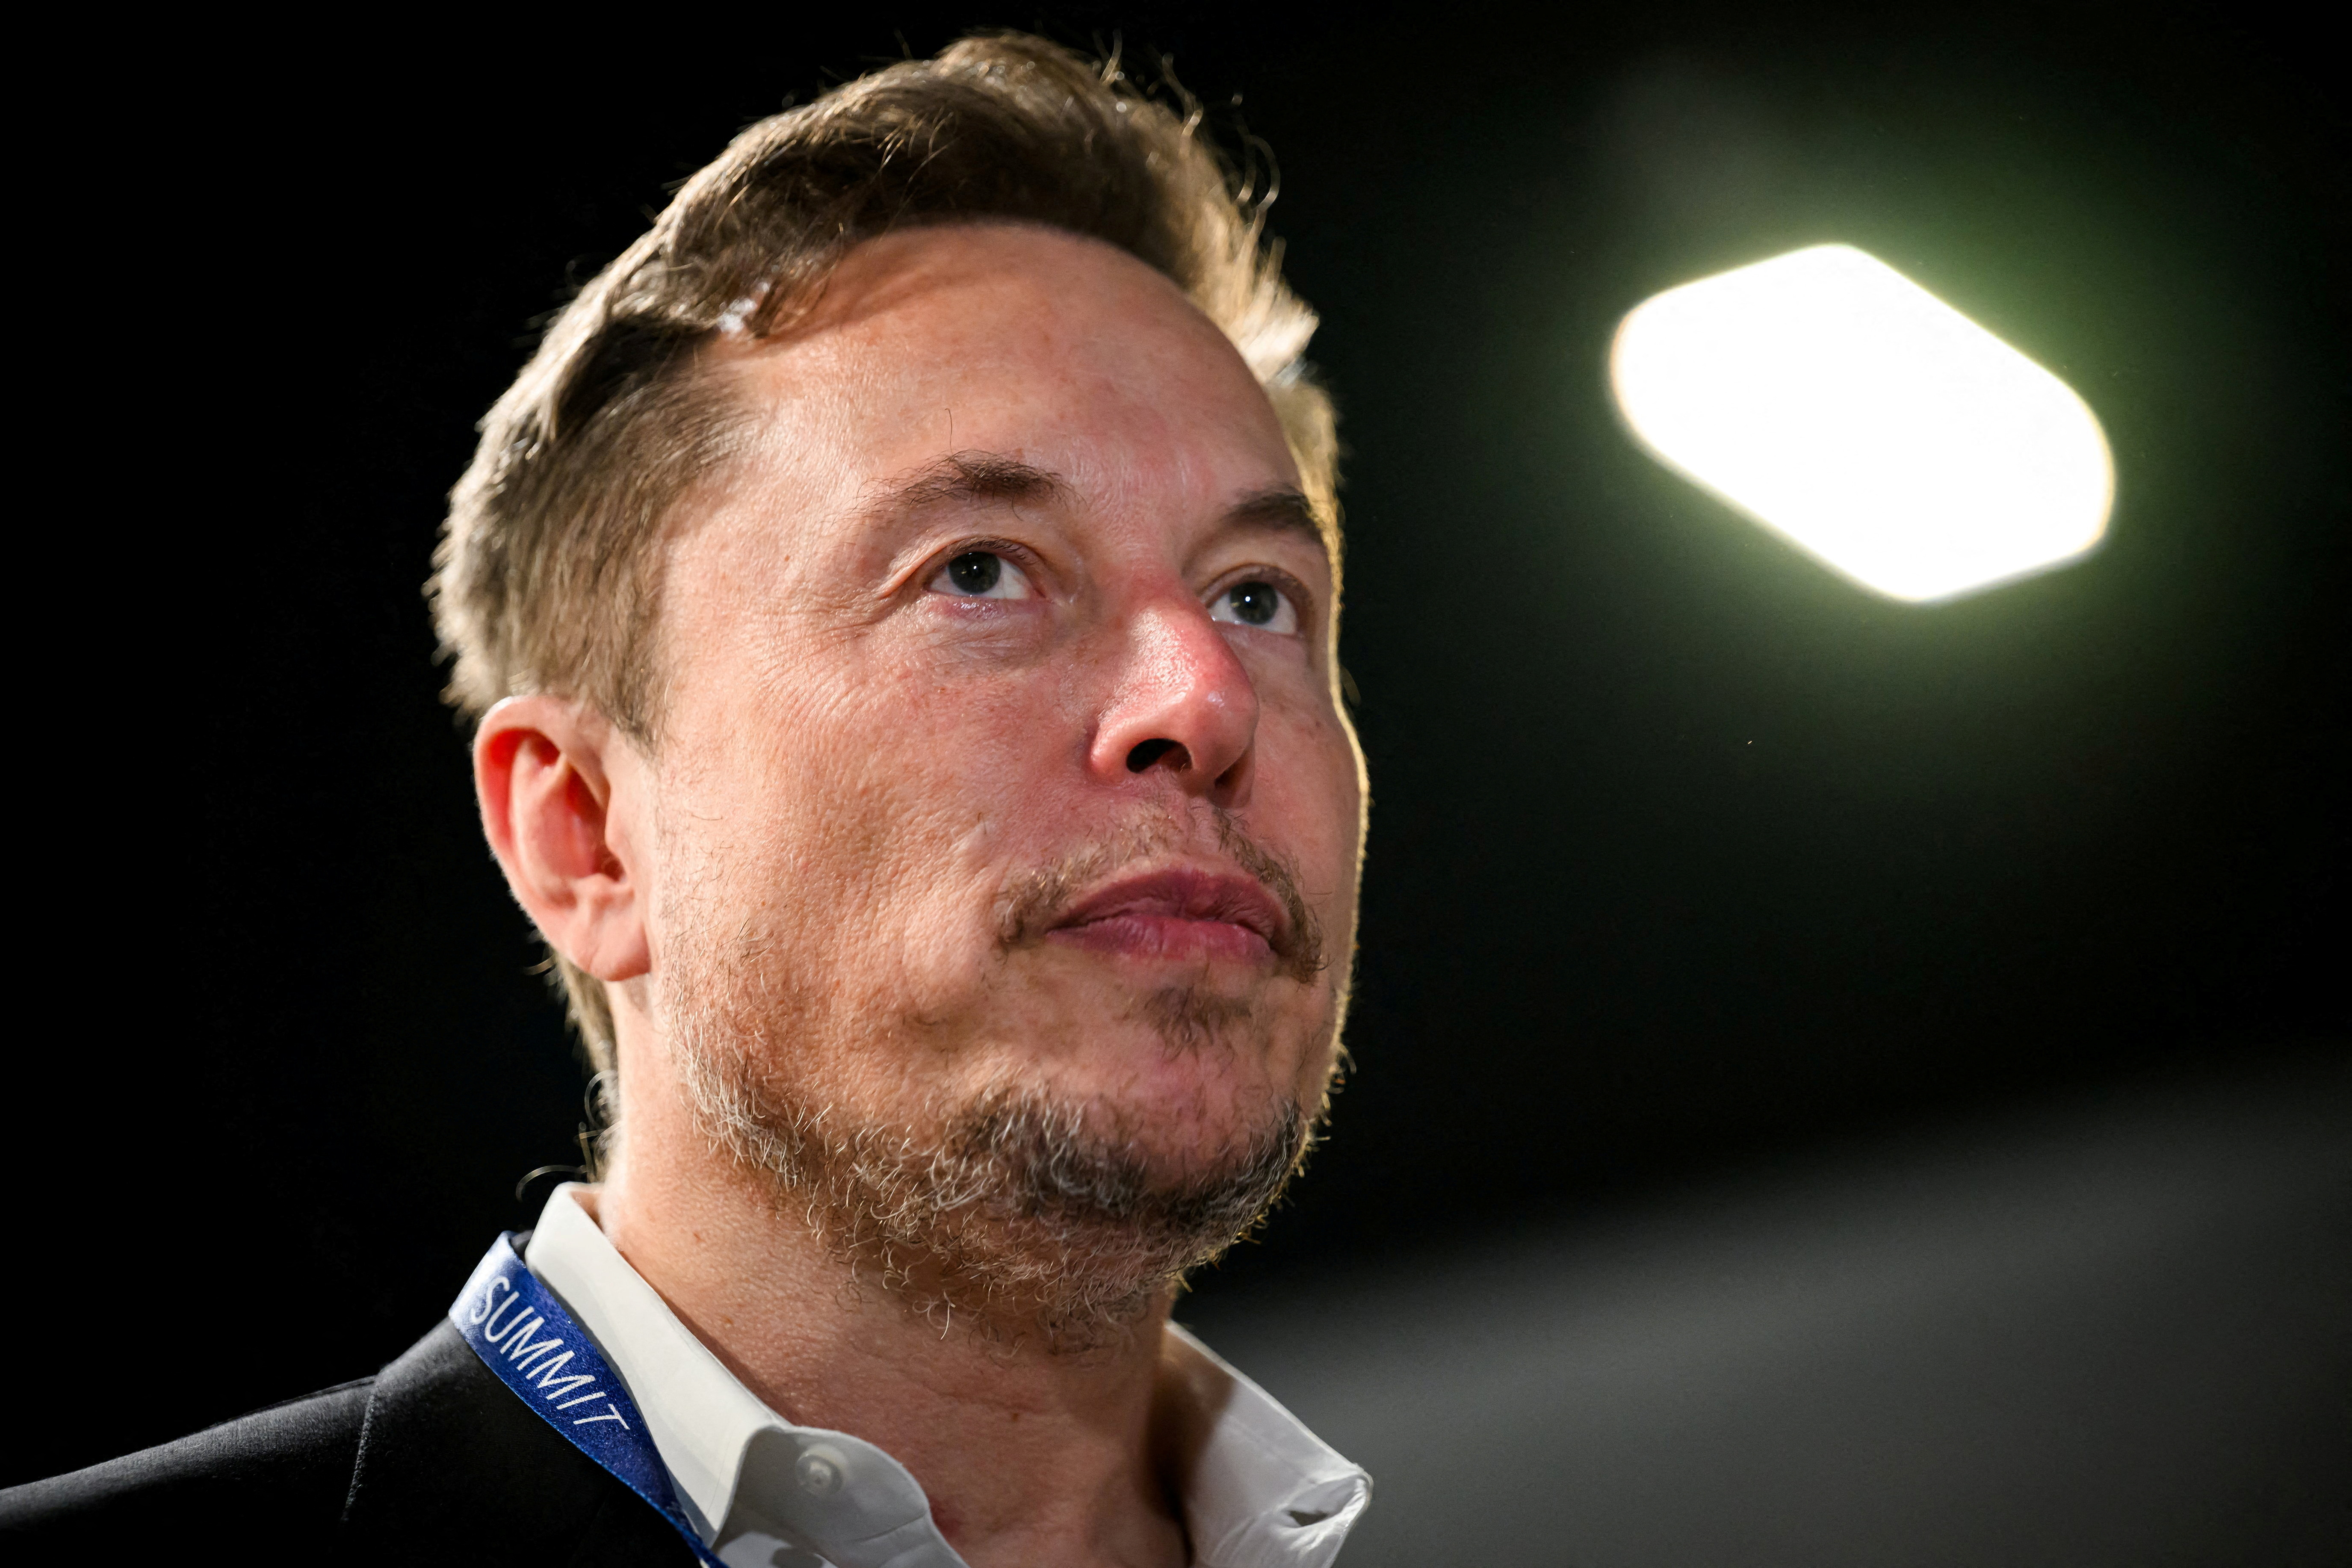 Elon Musk attends an AI Safety Summit in Bletchley